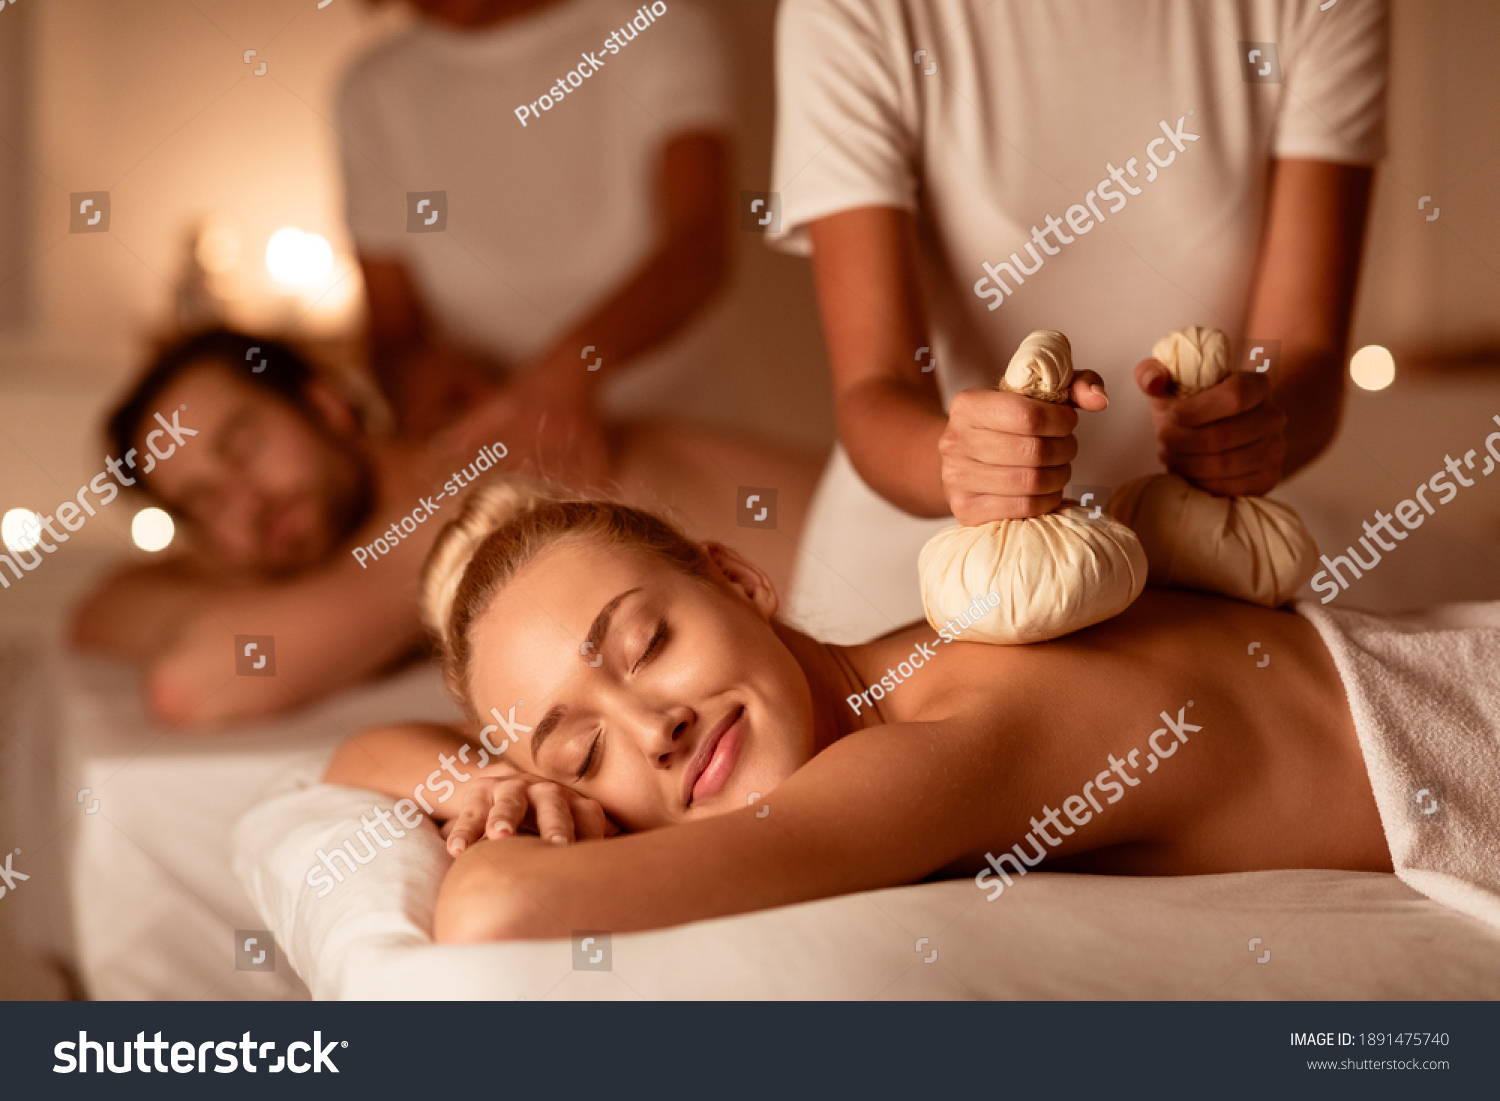 Couple Enjoying Herbal Massage. Relaxed Husband And Wife At Exotic Spa Resort, Lying With Eyes Closed Receiving Thai Massage With Aromatic Bags. Body Beauty Treatment, Relaxation And Wellness #1891475740